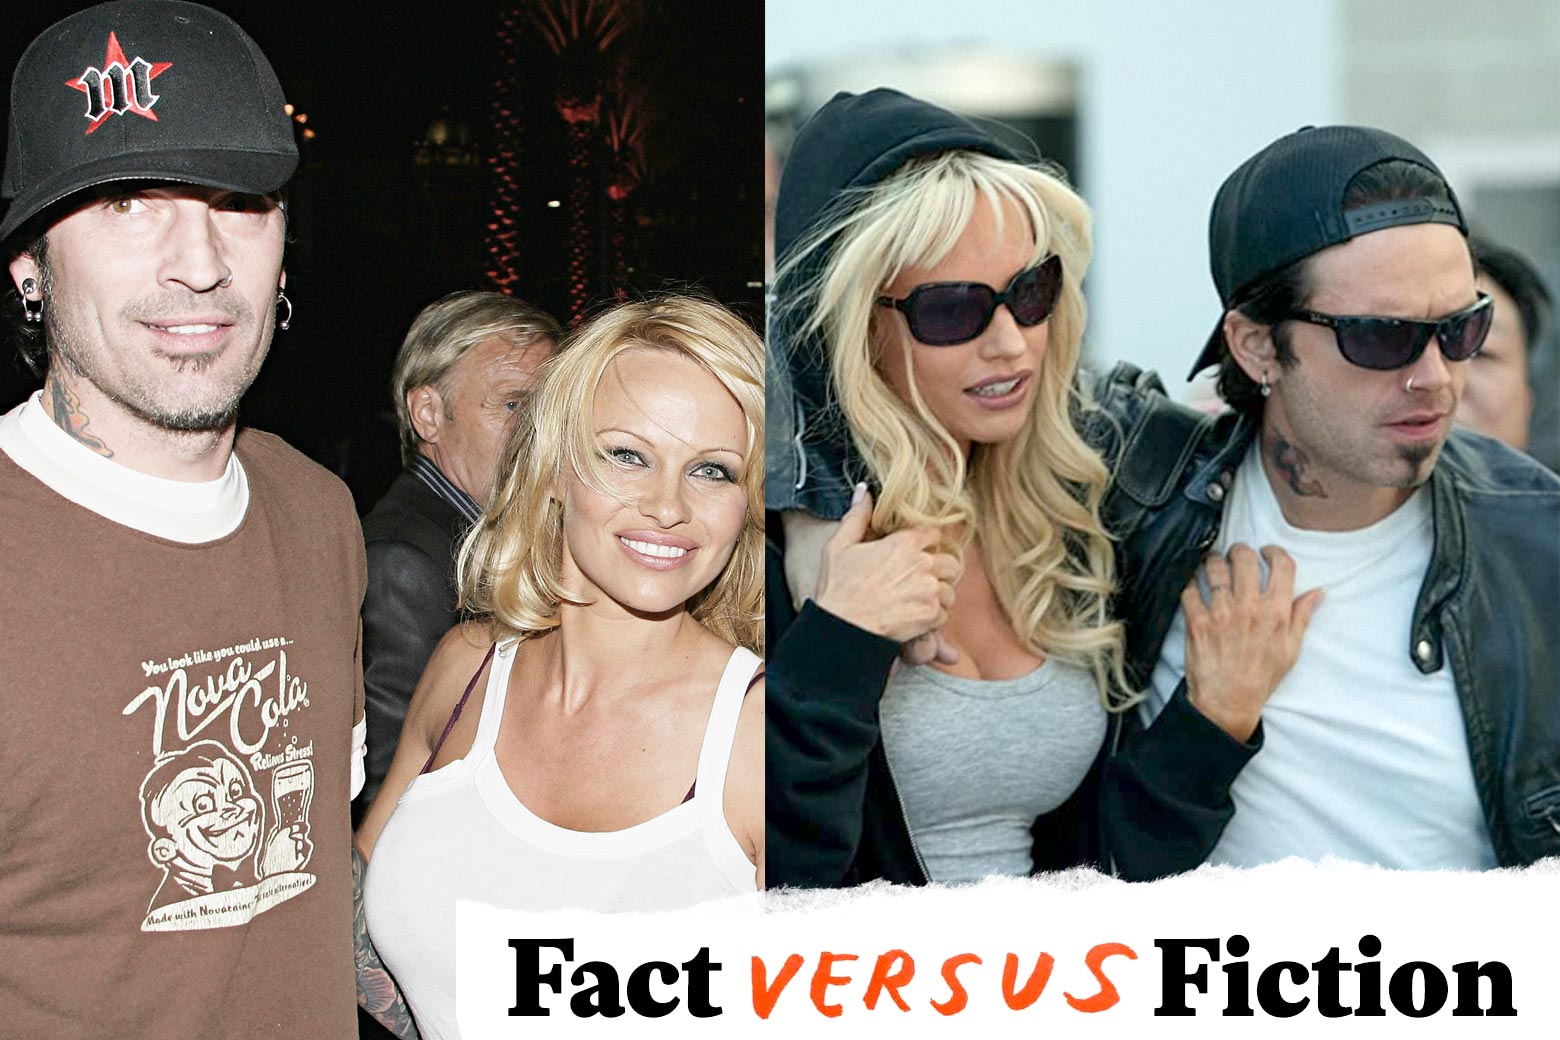 Pam and Tommy accuracy whats fact and whats fiction in the Hulu miniseries about Pamela Anderson and Tommy Lee. pic